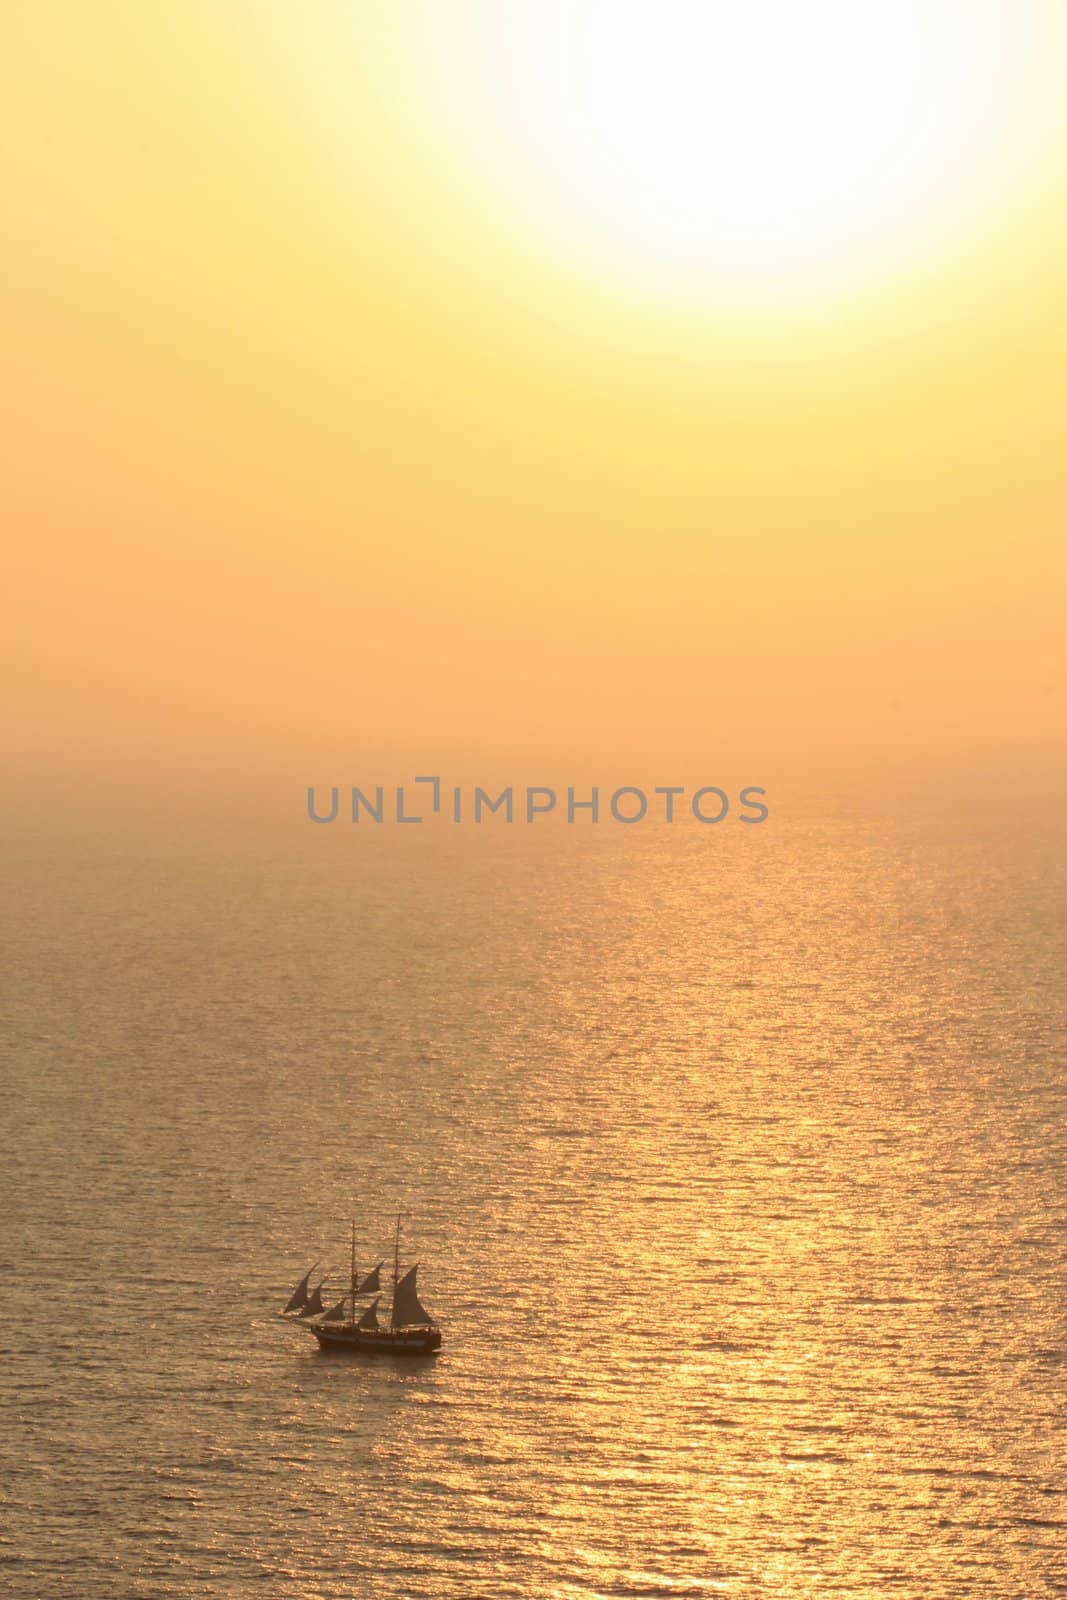 Old sailing boat at sunset by Elenaphotos21